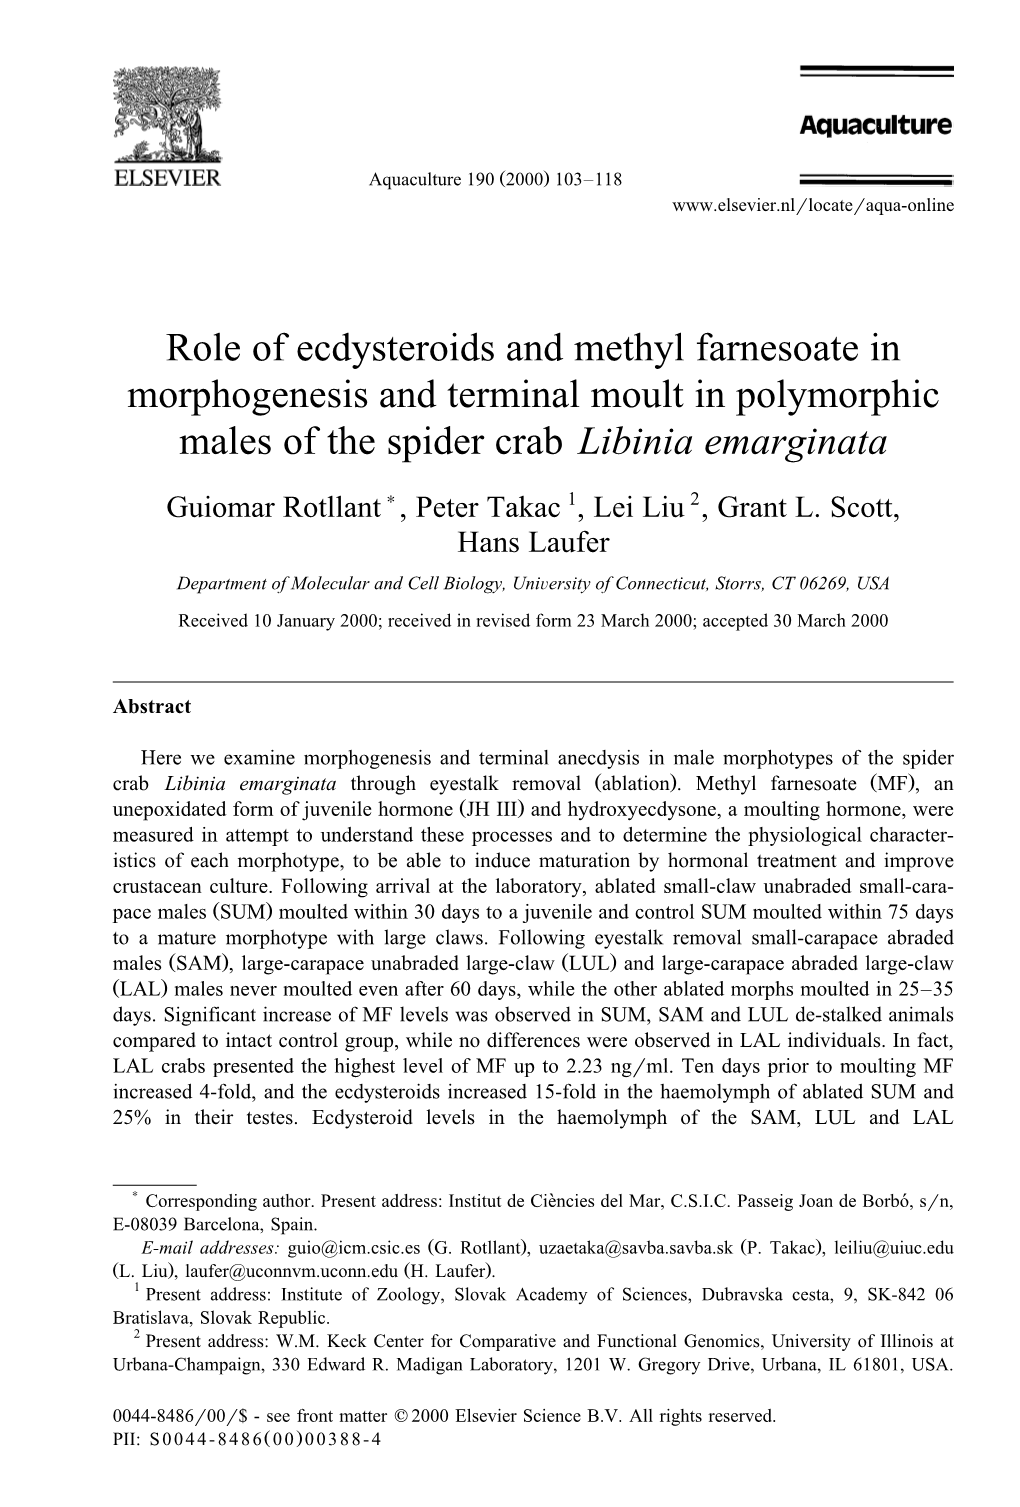 Role of Ecdysteroids and Methyl Farnesoate in Morphogenesis and Terminal Moult in Polymorphic Males of the Spider Crab Libinia Emarginata